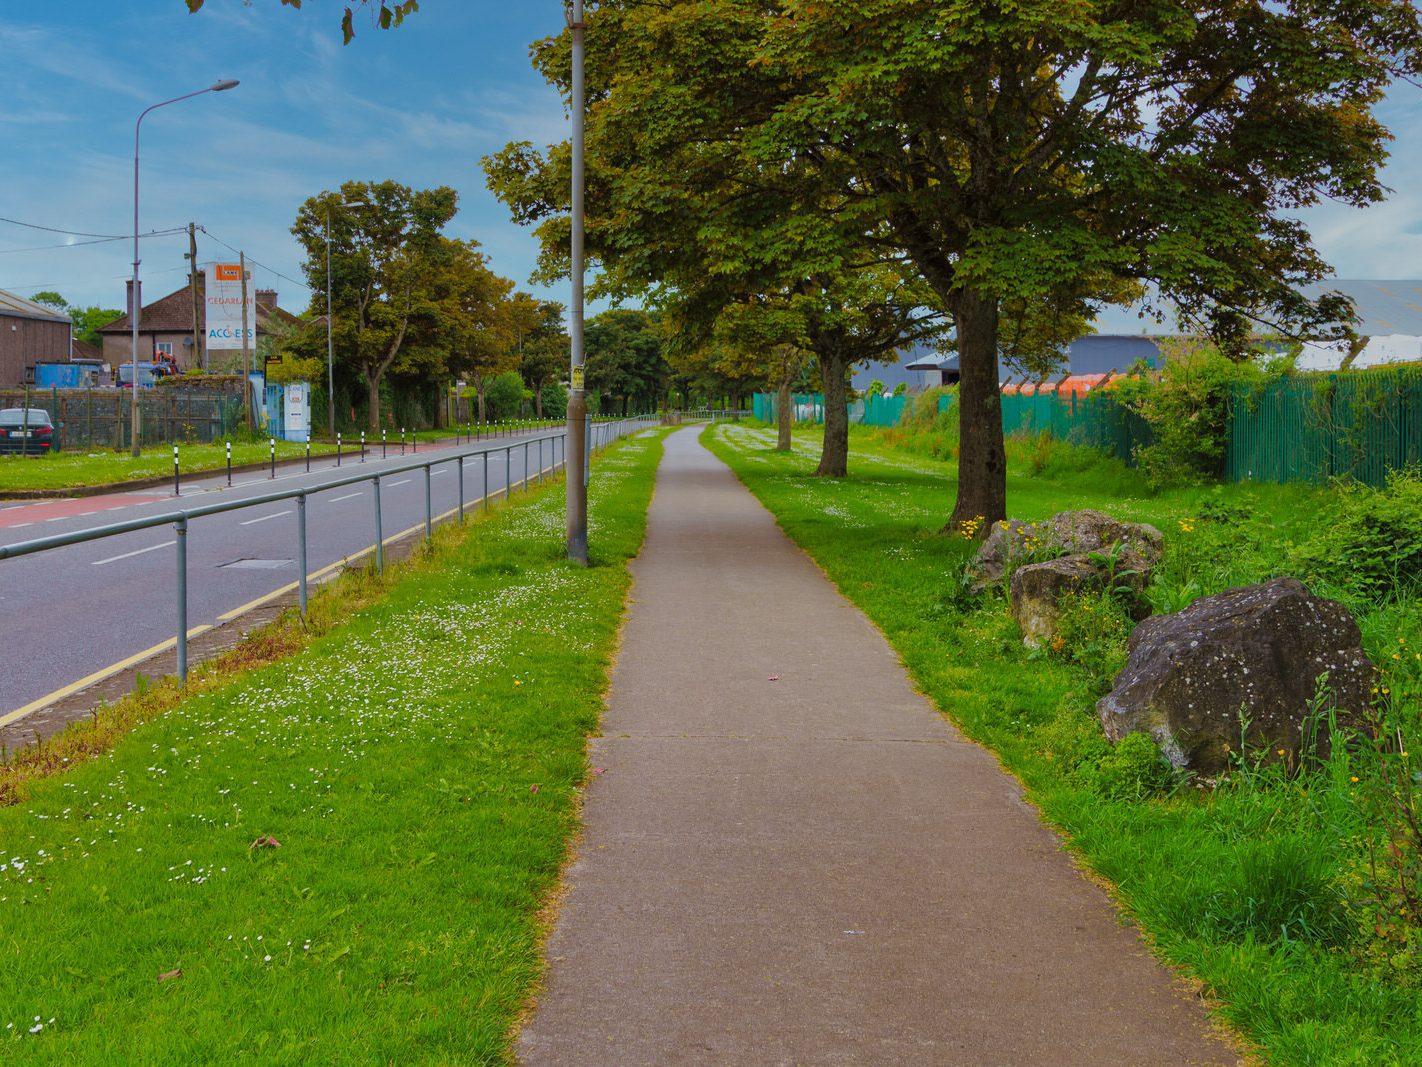 MONAHAN ROAD IN THE DOCKLANDS AREA OF CORK CITY [12 MAY 2022] 009